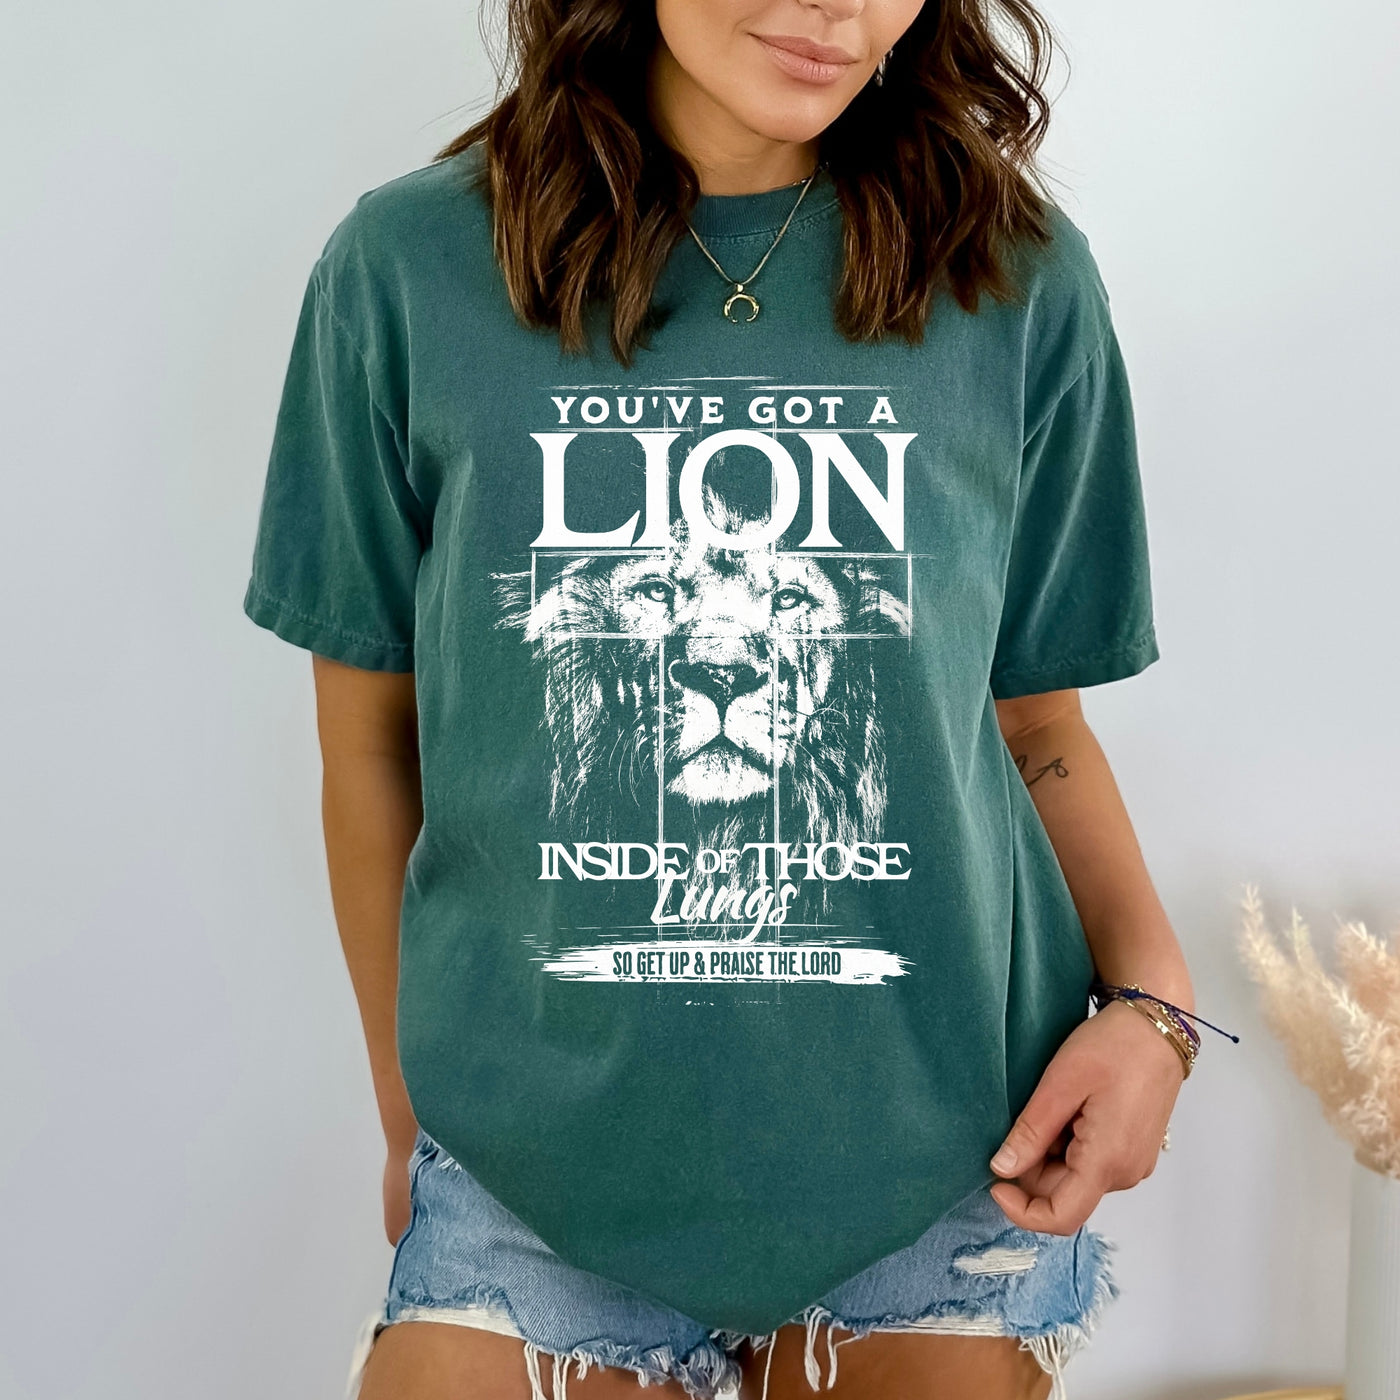 You've got a lion inside of those lungs - COMPLETED TEES